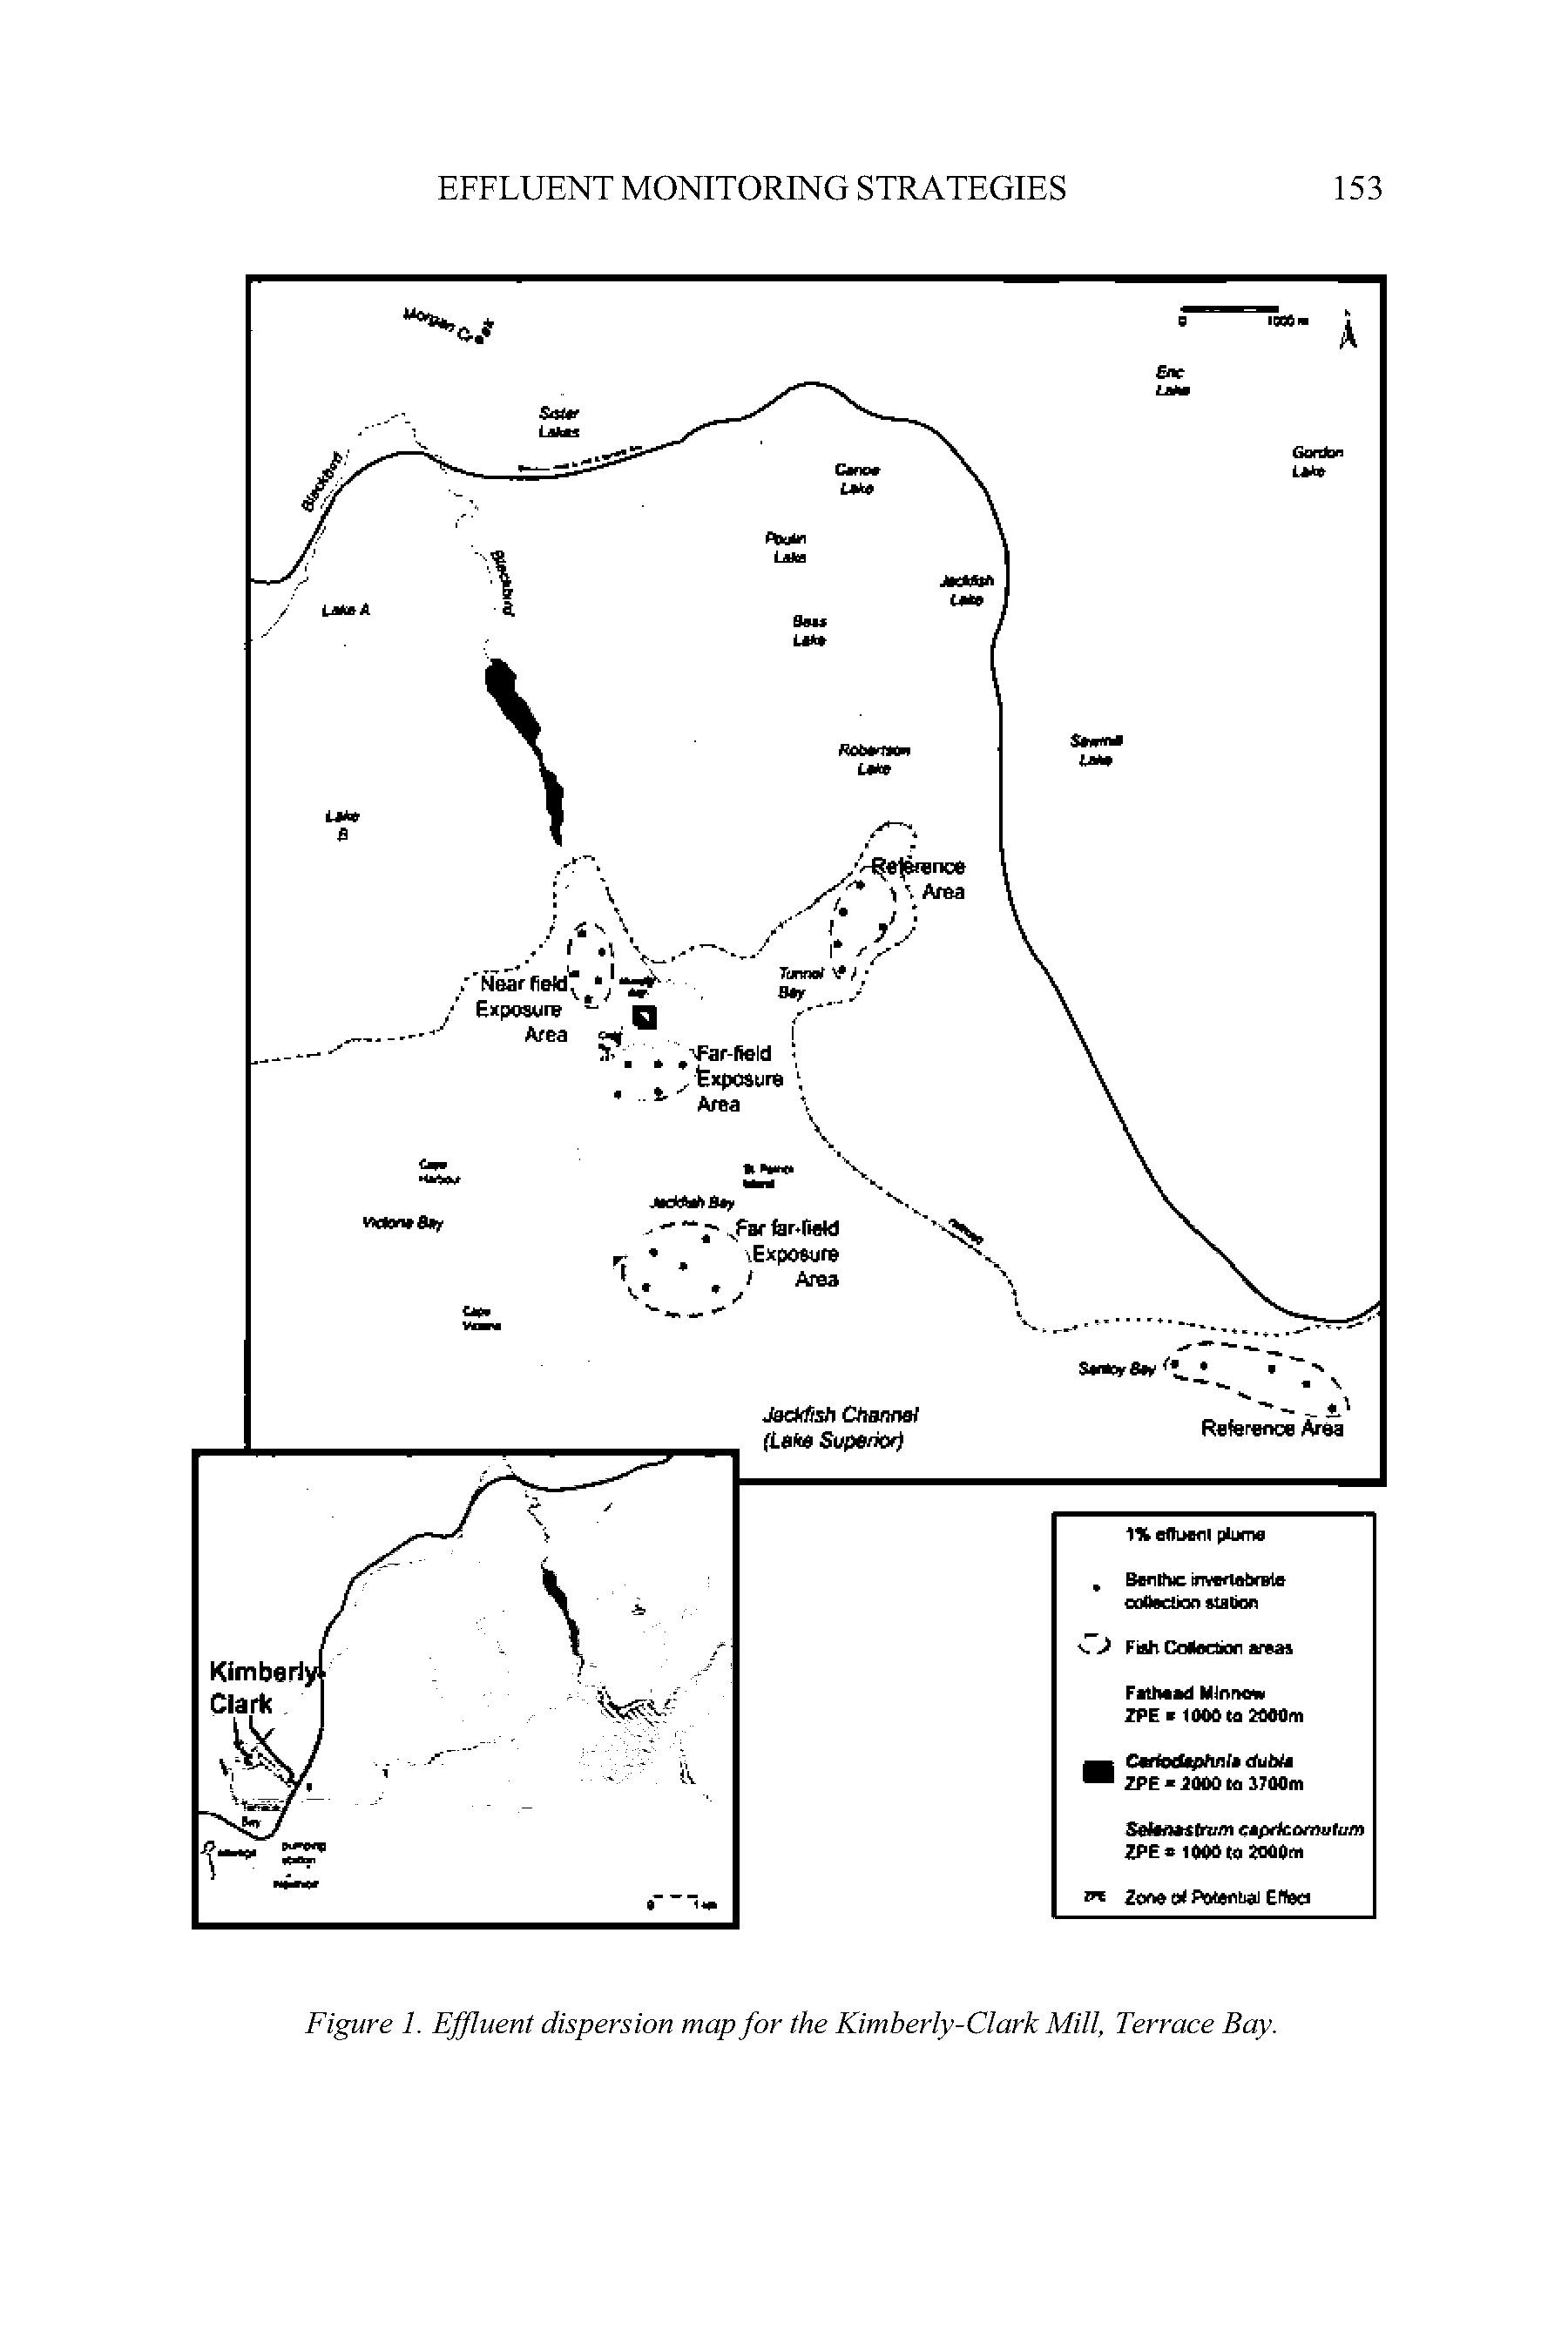 Figure 1. Effluent dispersion map for the Kimberly-Clark Mill, Terrace Bay.